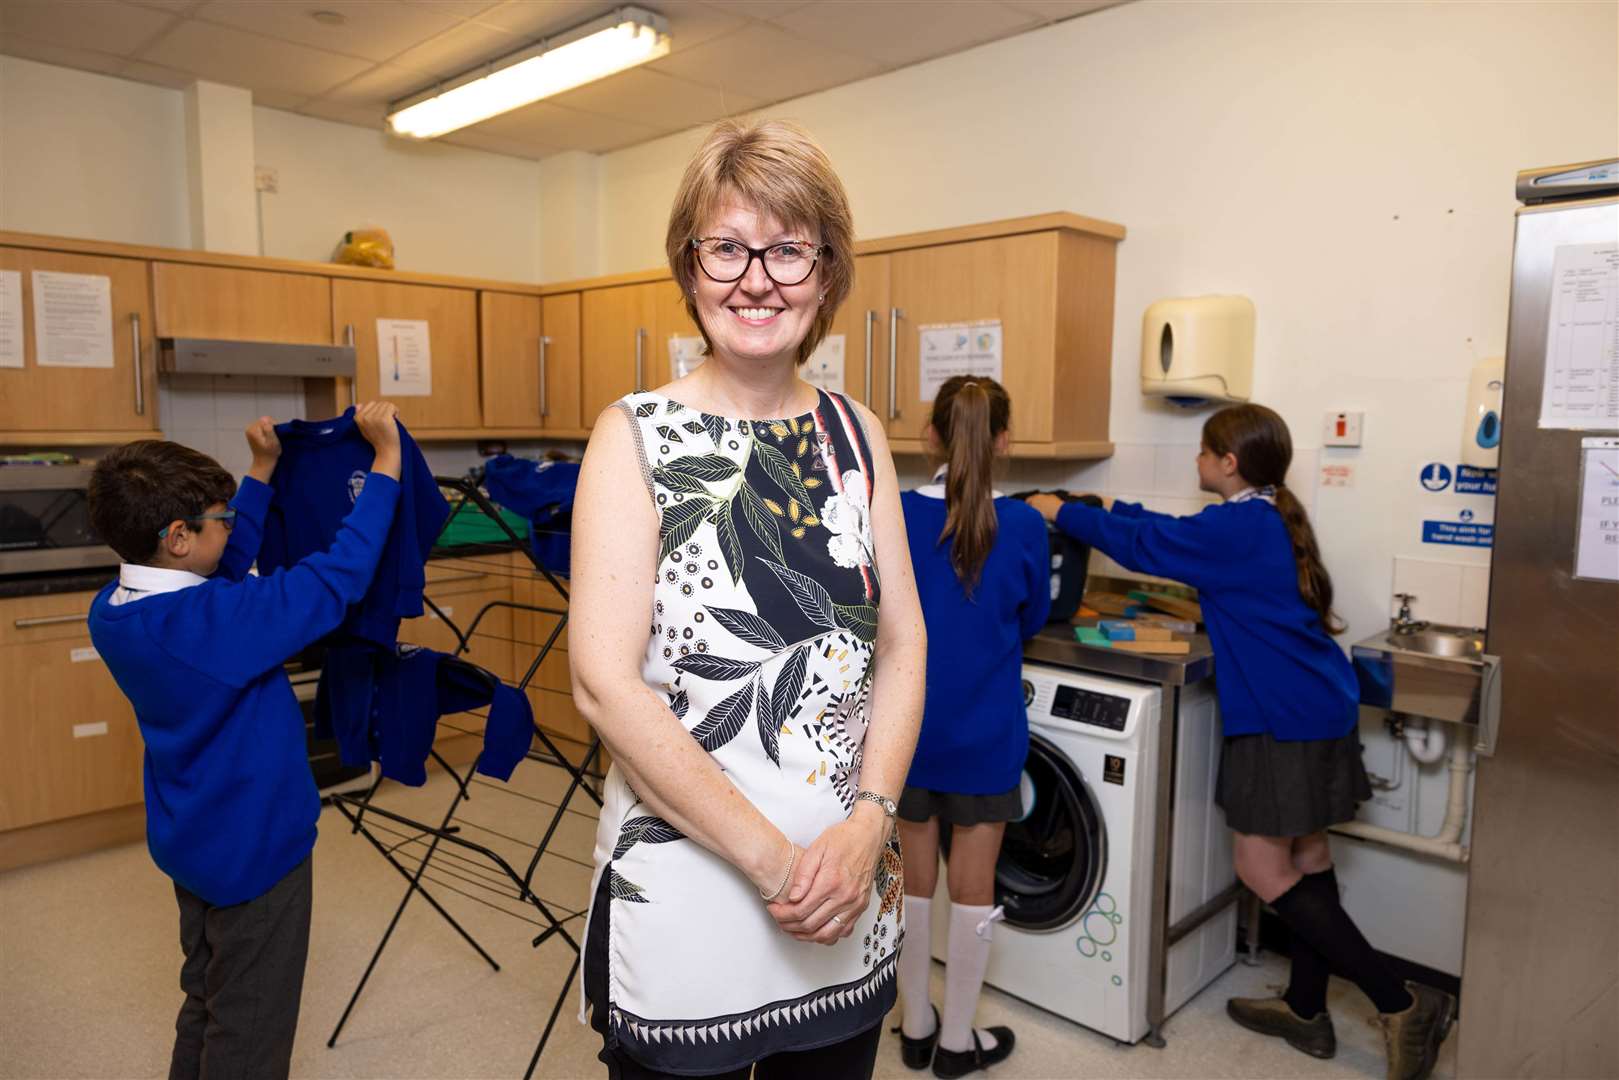 Executive headteacher, Sarah Smith visits the laundry facilities at St Cuthbert’s Catholic Academy in Blackpool, which have been provided by smol in collaboration with The Hygiene Bank (James Speakman/PA)